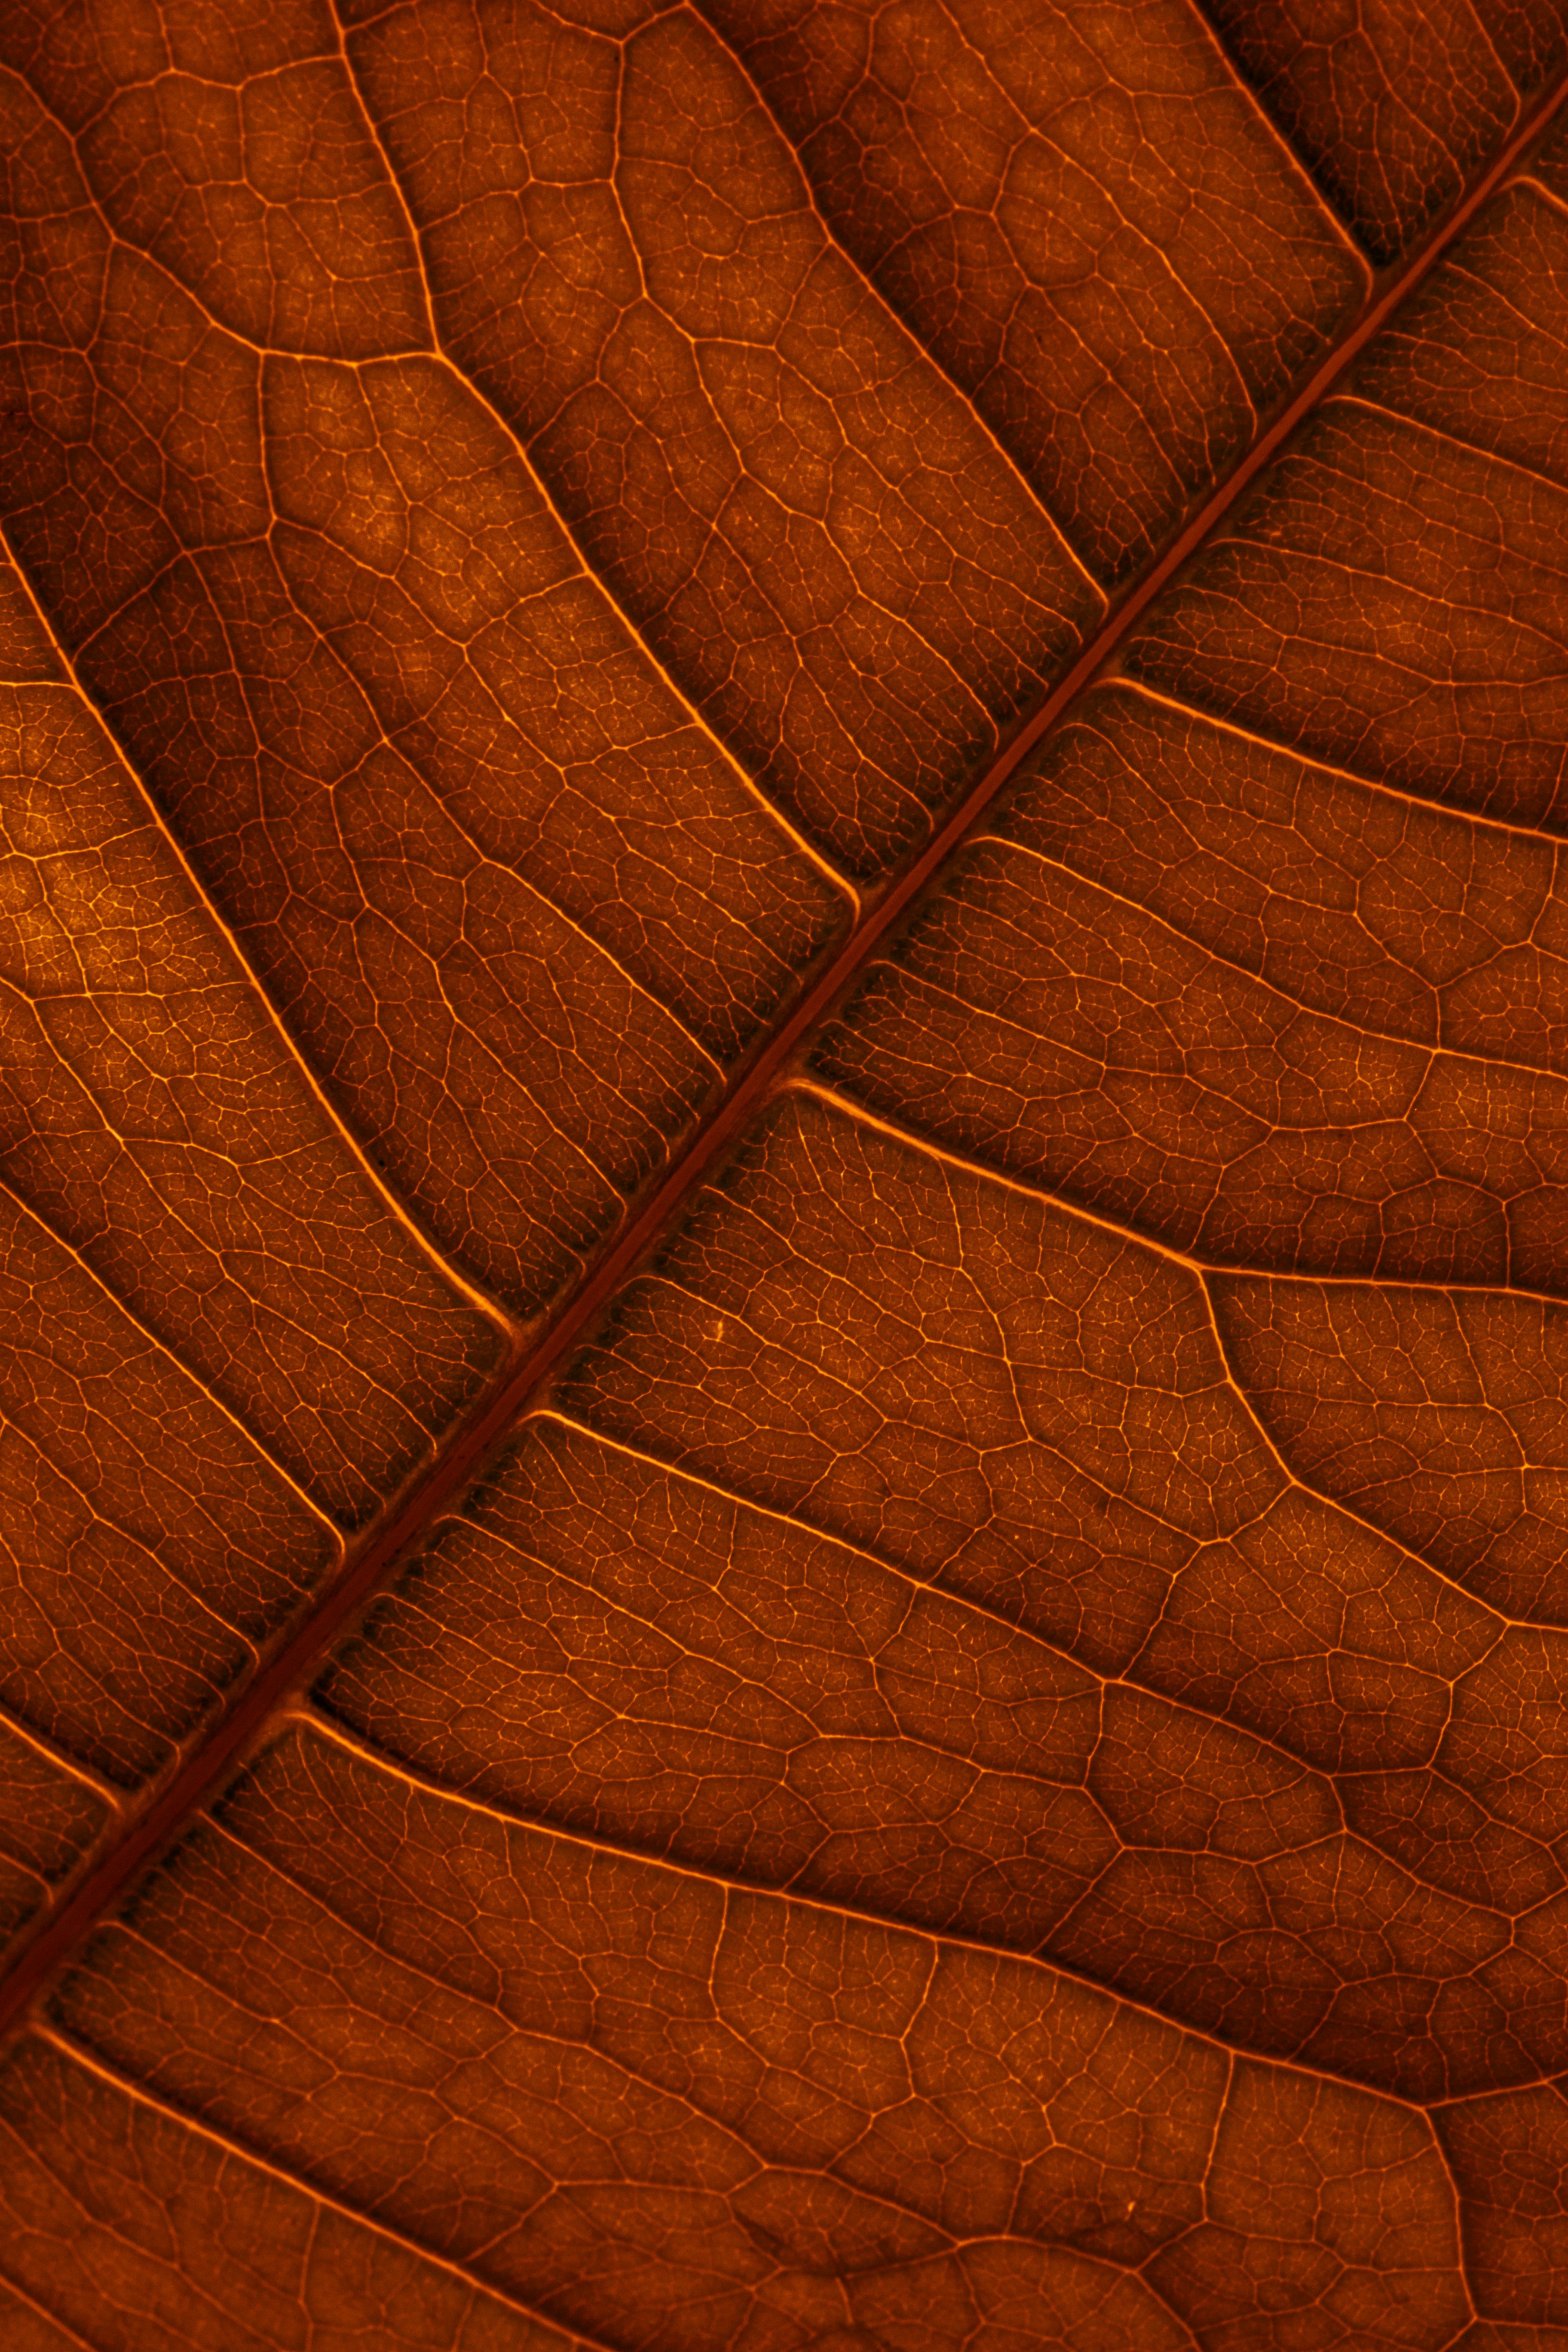 Autumn leaf
Thanks for your support BTC: 12hER8ygESYktQodhwkhqjuc4nLuzRQBuh